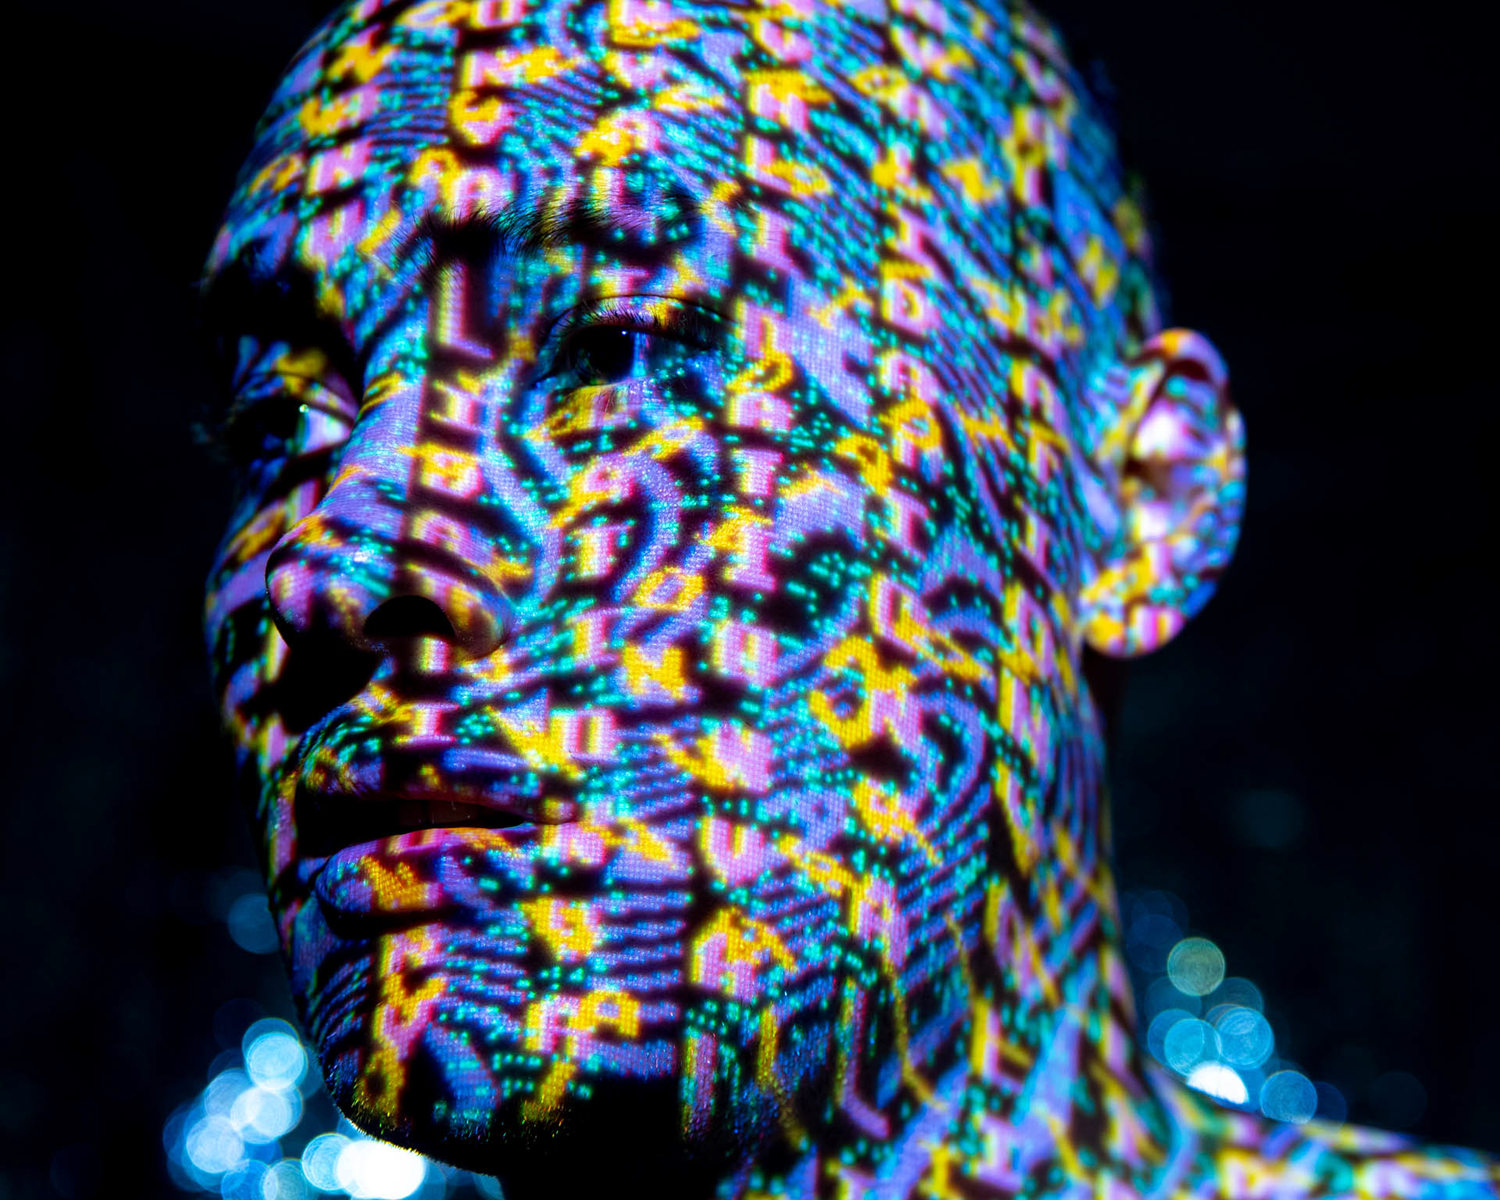 Colour image of a portrait of a man with projected digital imagery covering his face. 